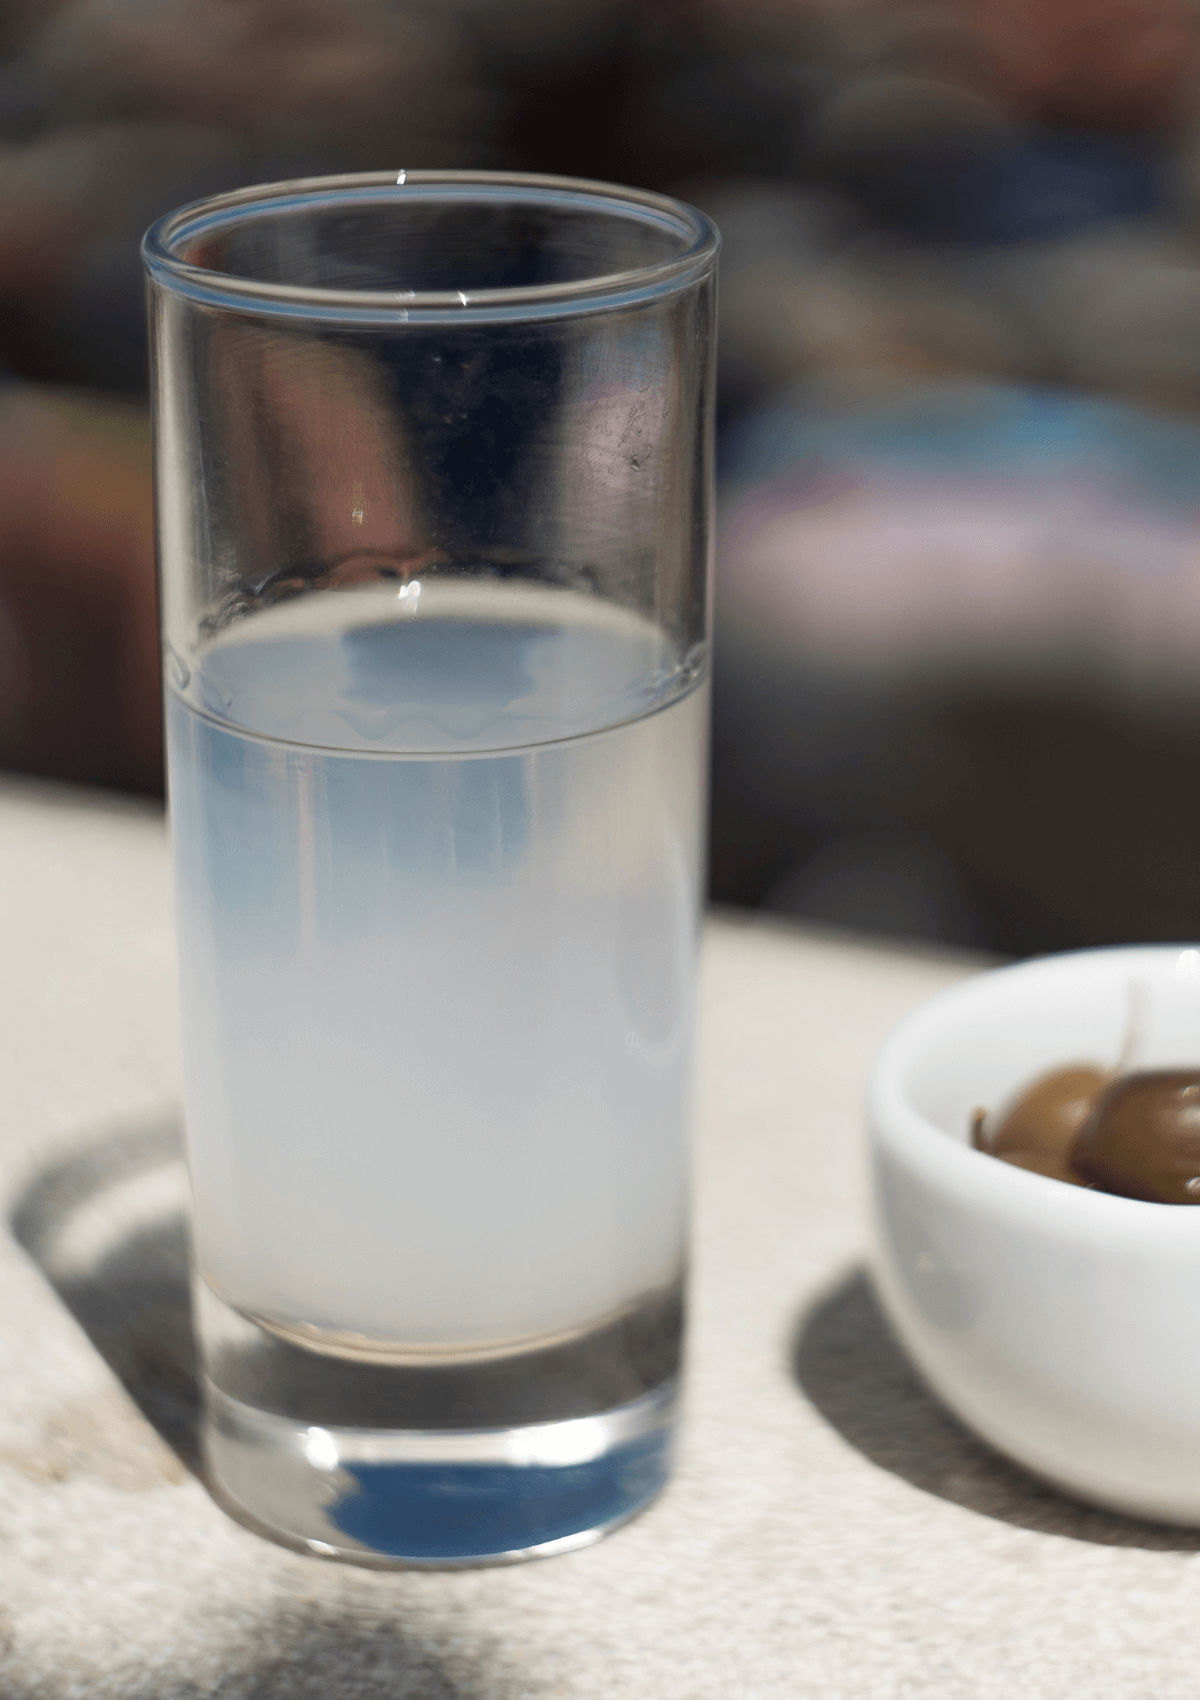 Ouzo is a typical souvenir to bring home from Athens